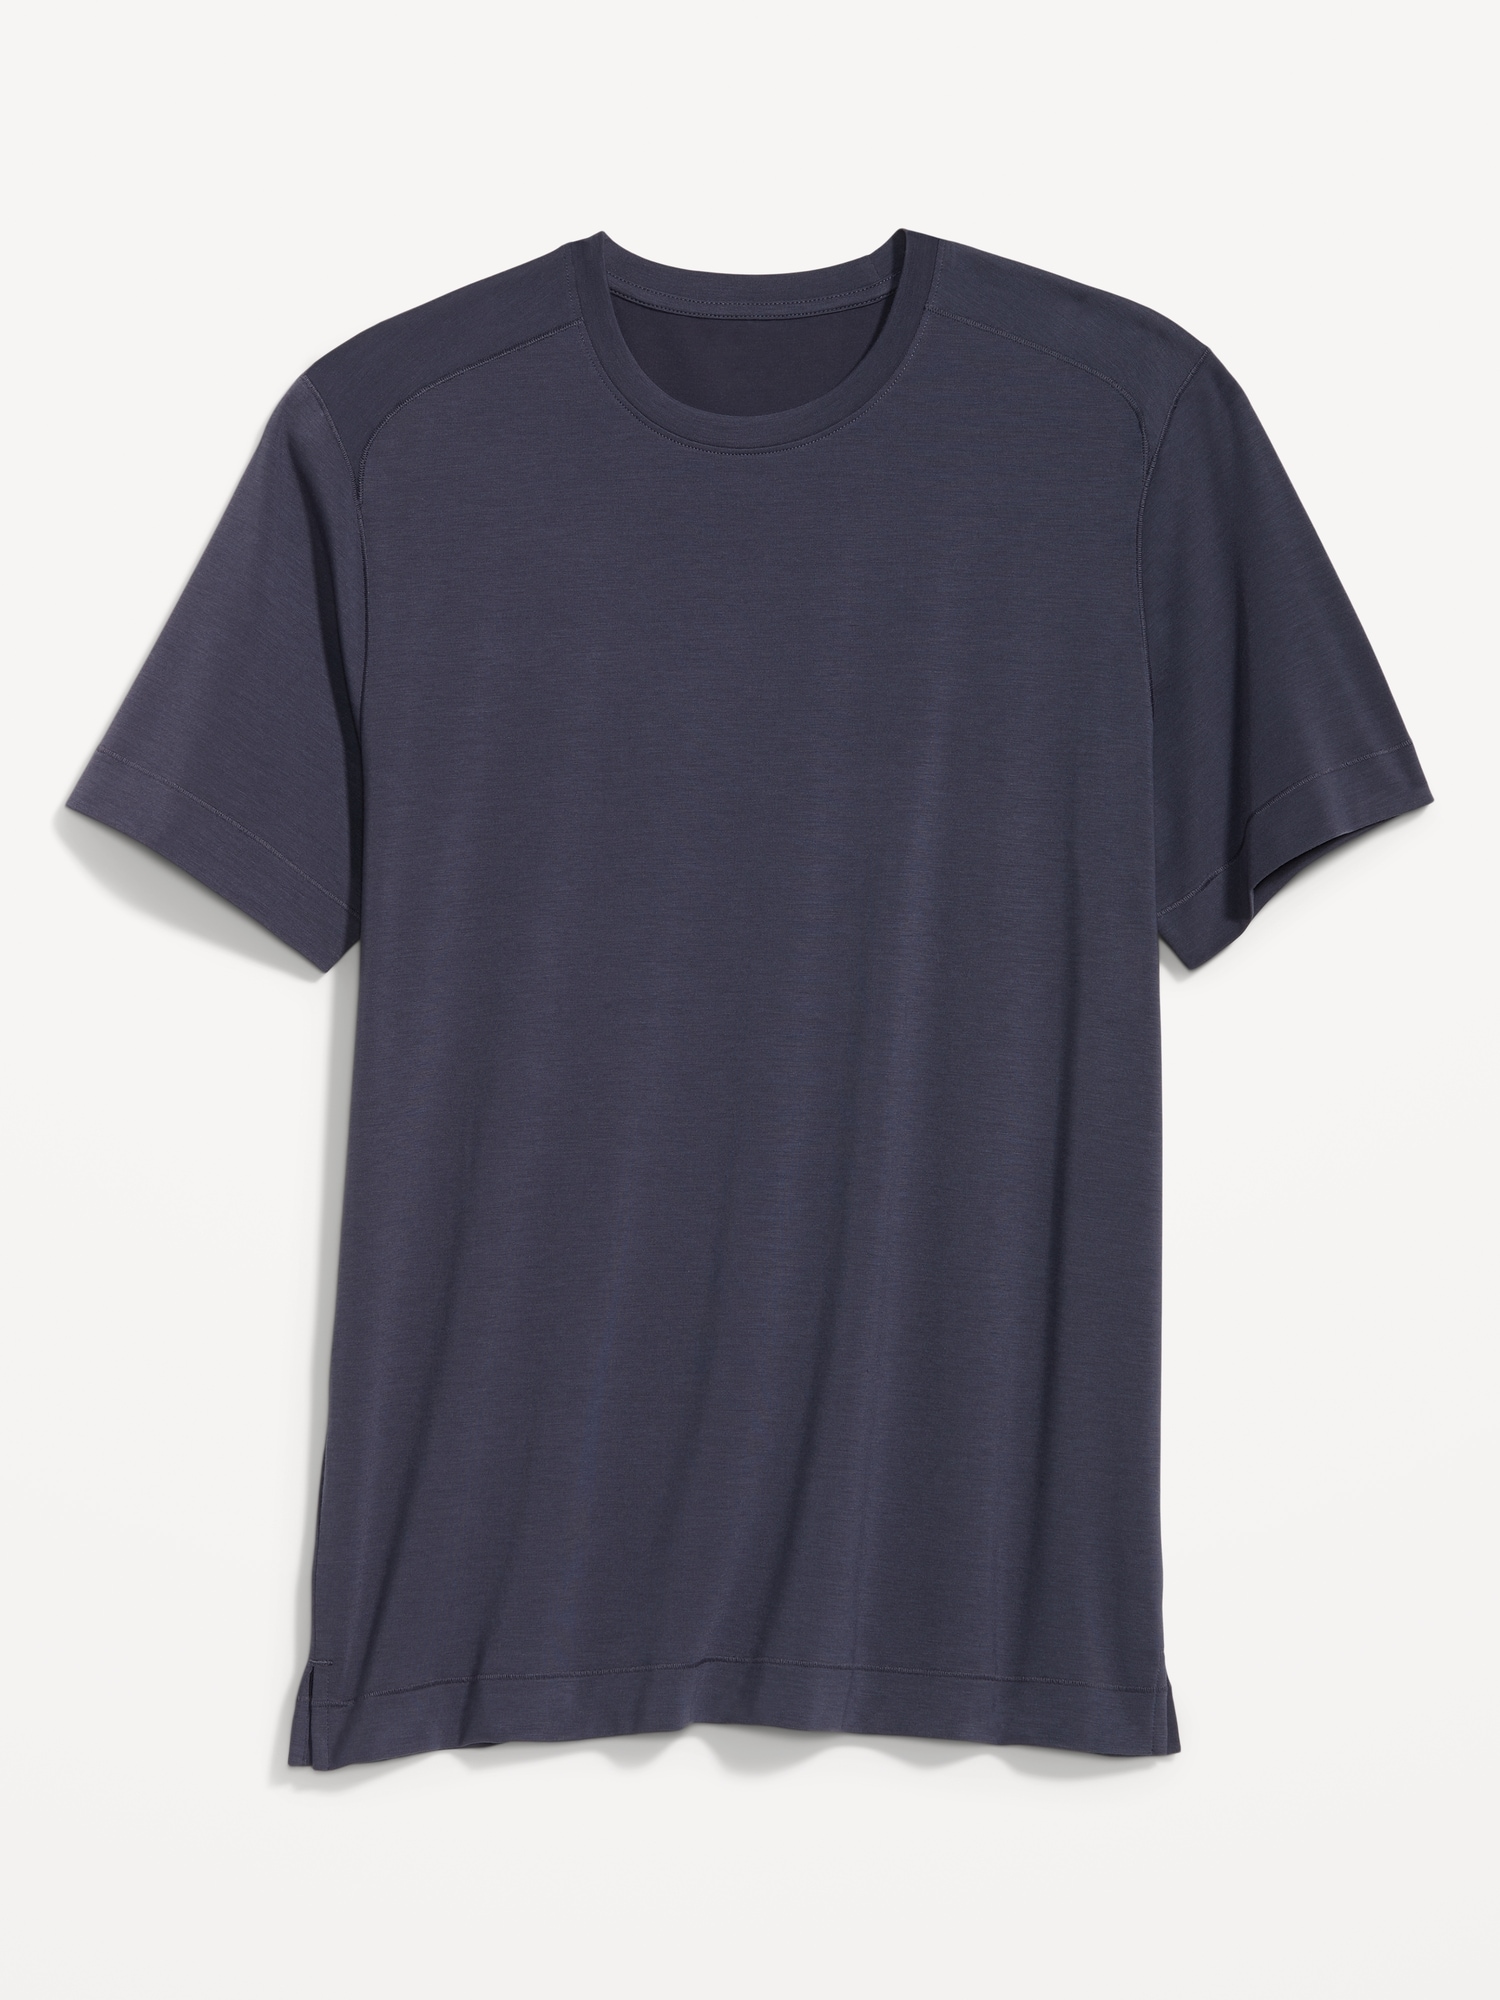 Beyond 4-Way Stretch T-Shirt for Men | Old Navy